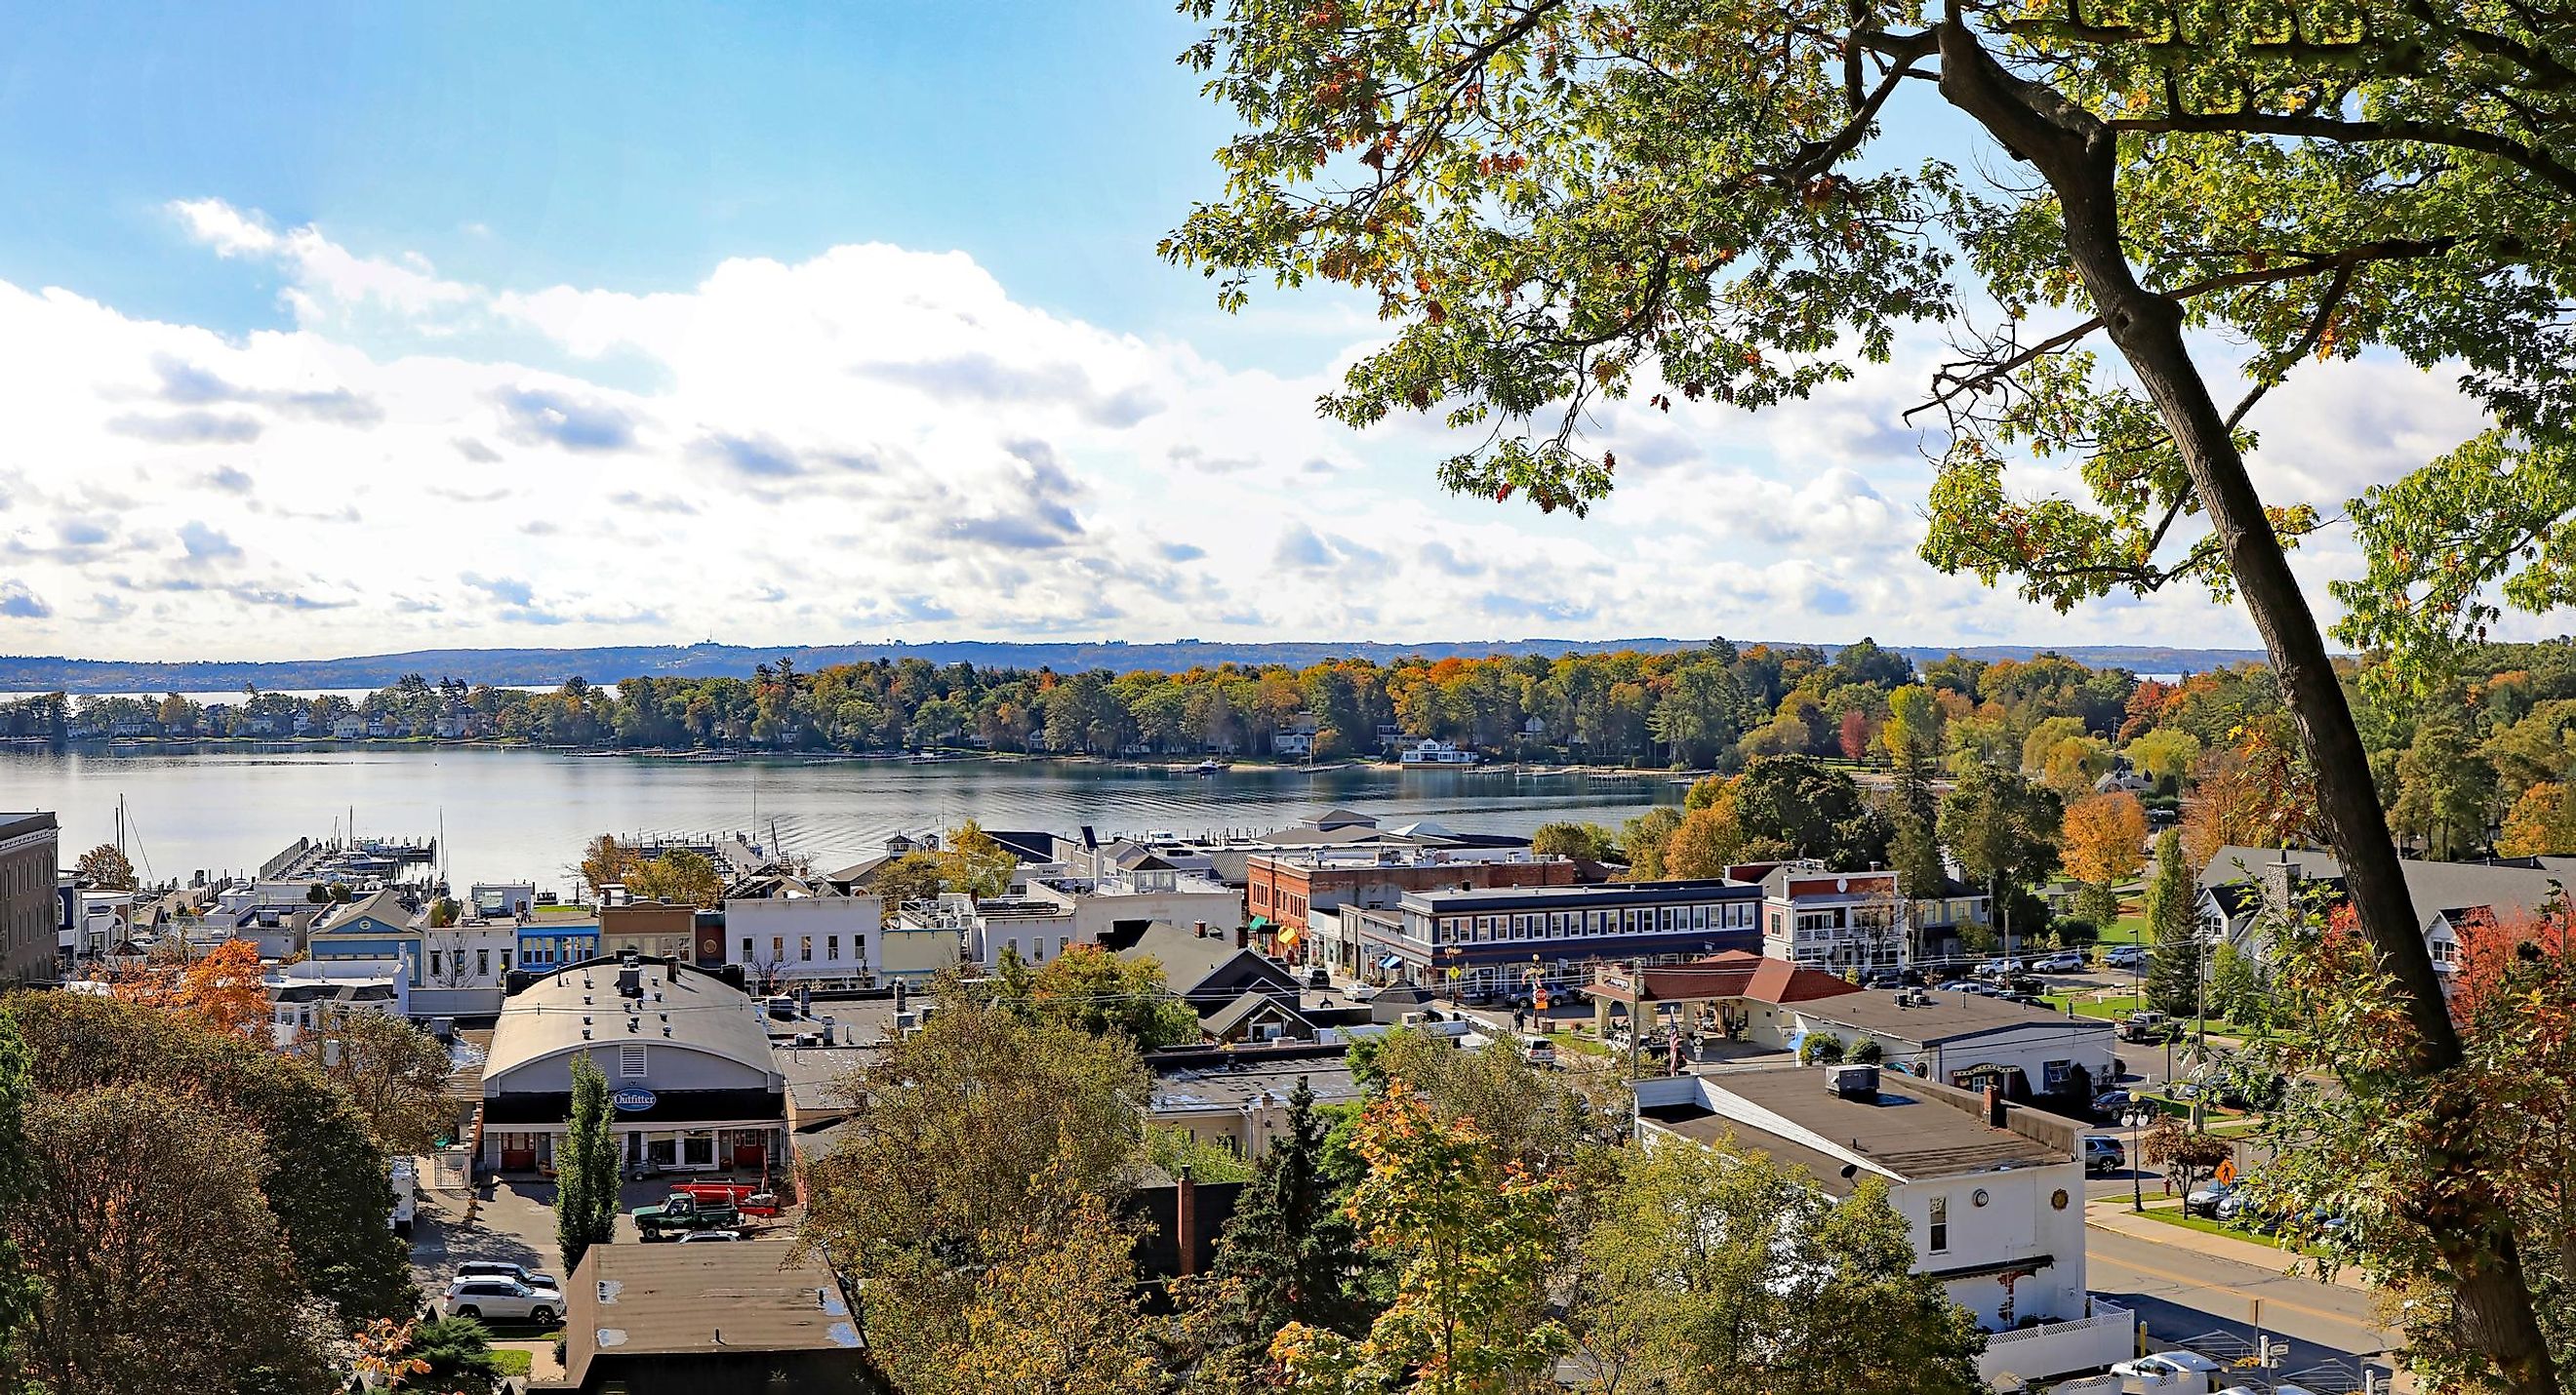 Panorama of Harbor Springs, Michigan, from the scenic overlook point above the resort town in Northern Michigan near Petoskey.